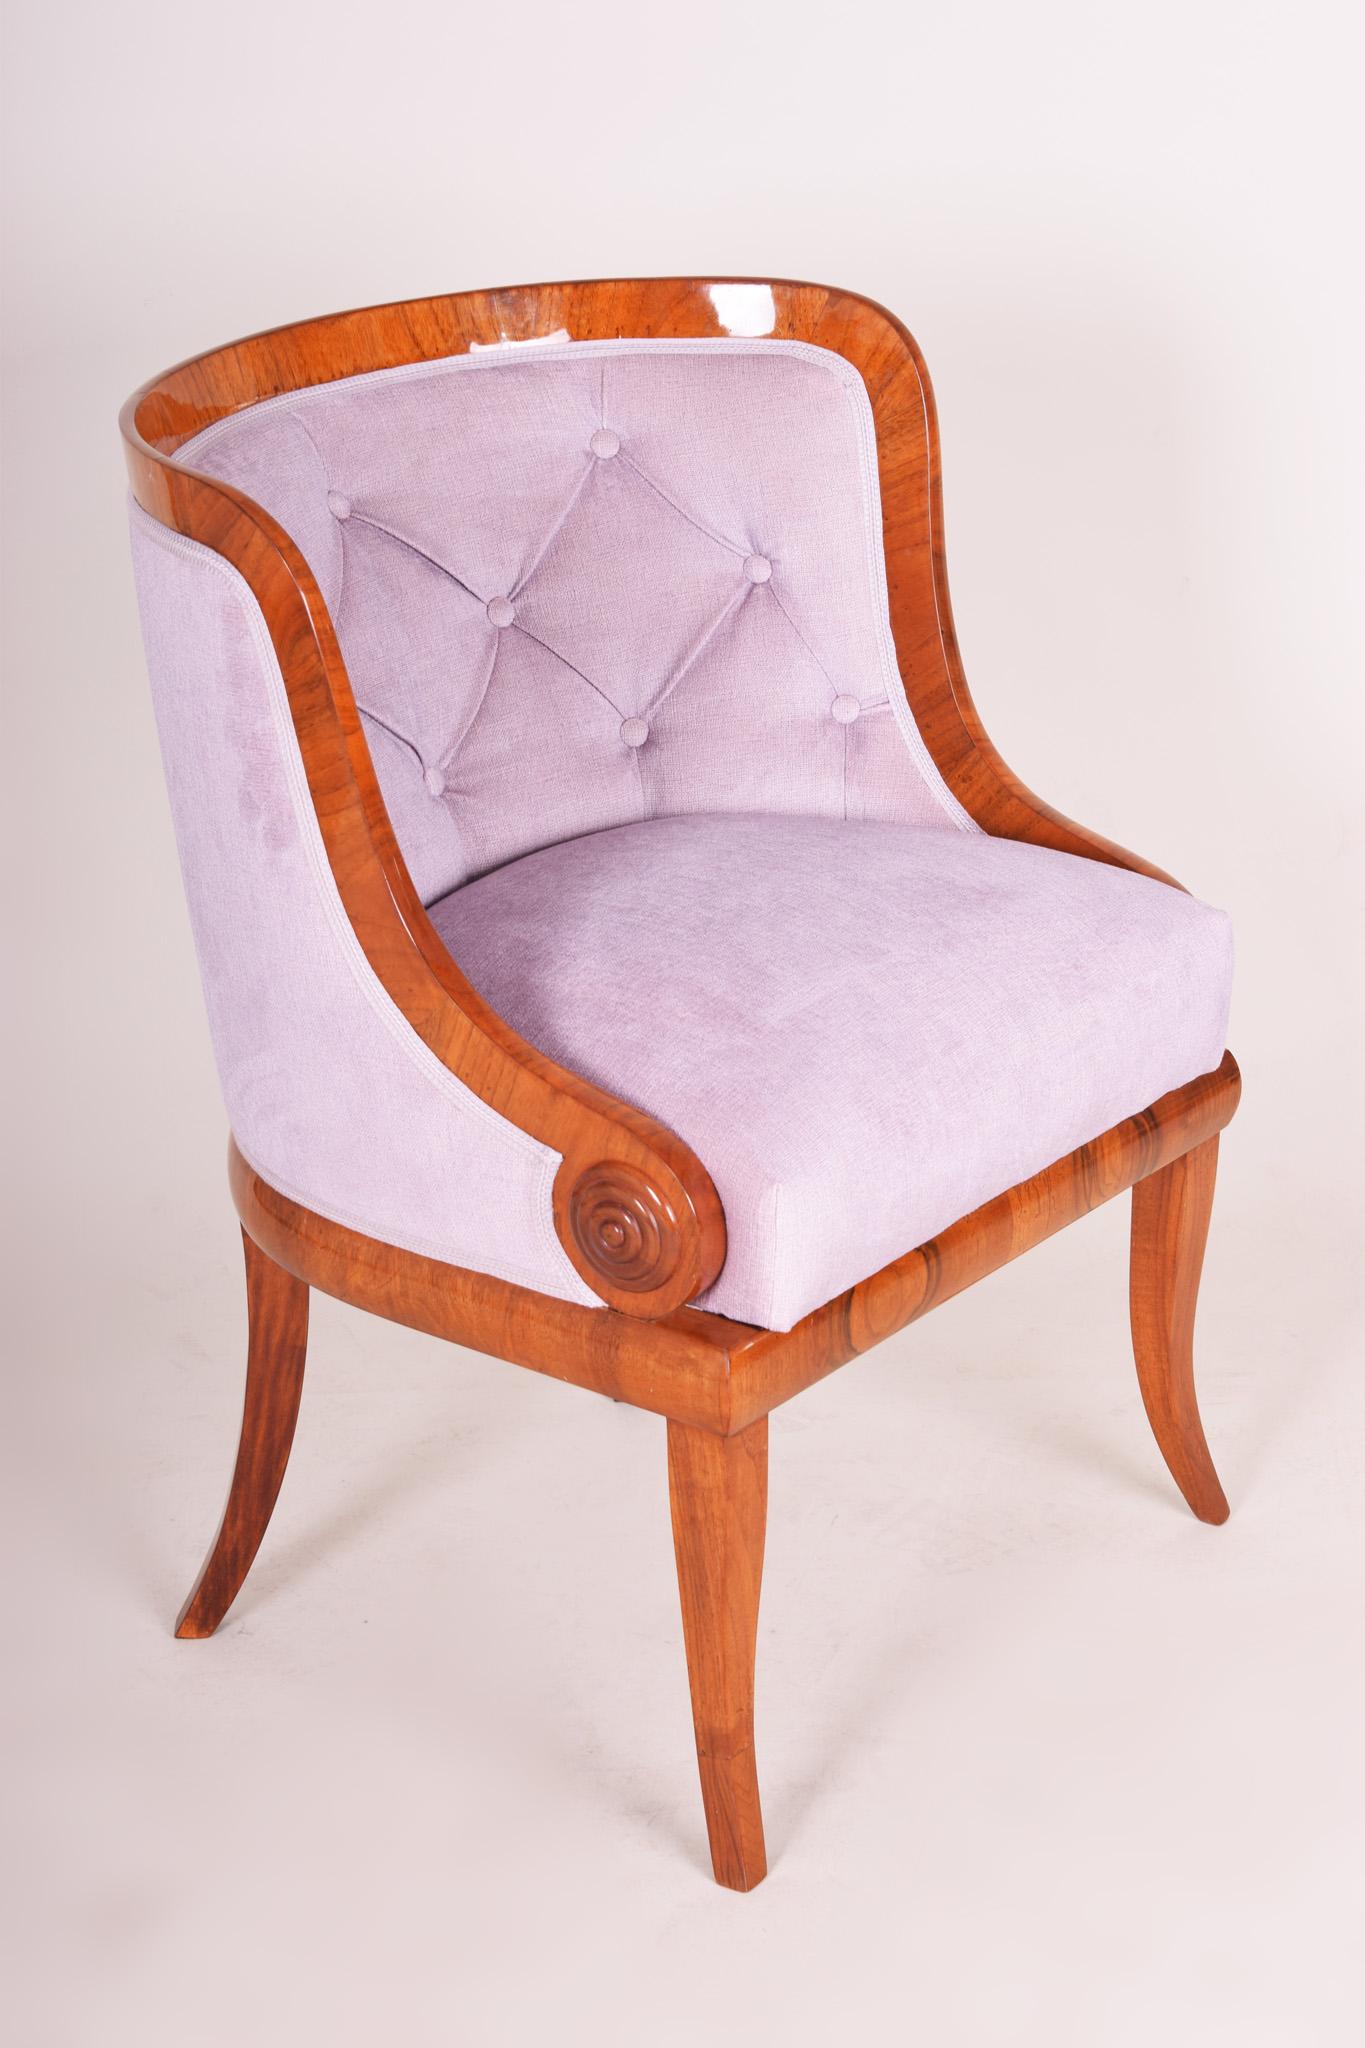 Czech Brown and Pink Bohemian Armchair Made Out of Walnut, 1820s, Biedermeier Style For Sale